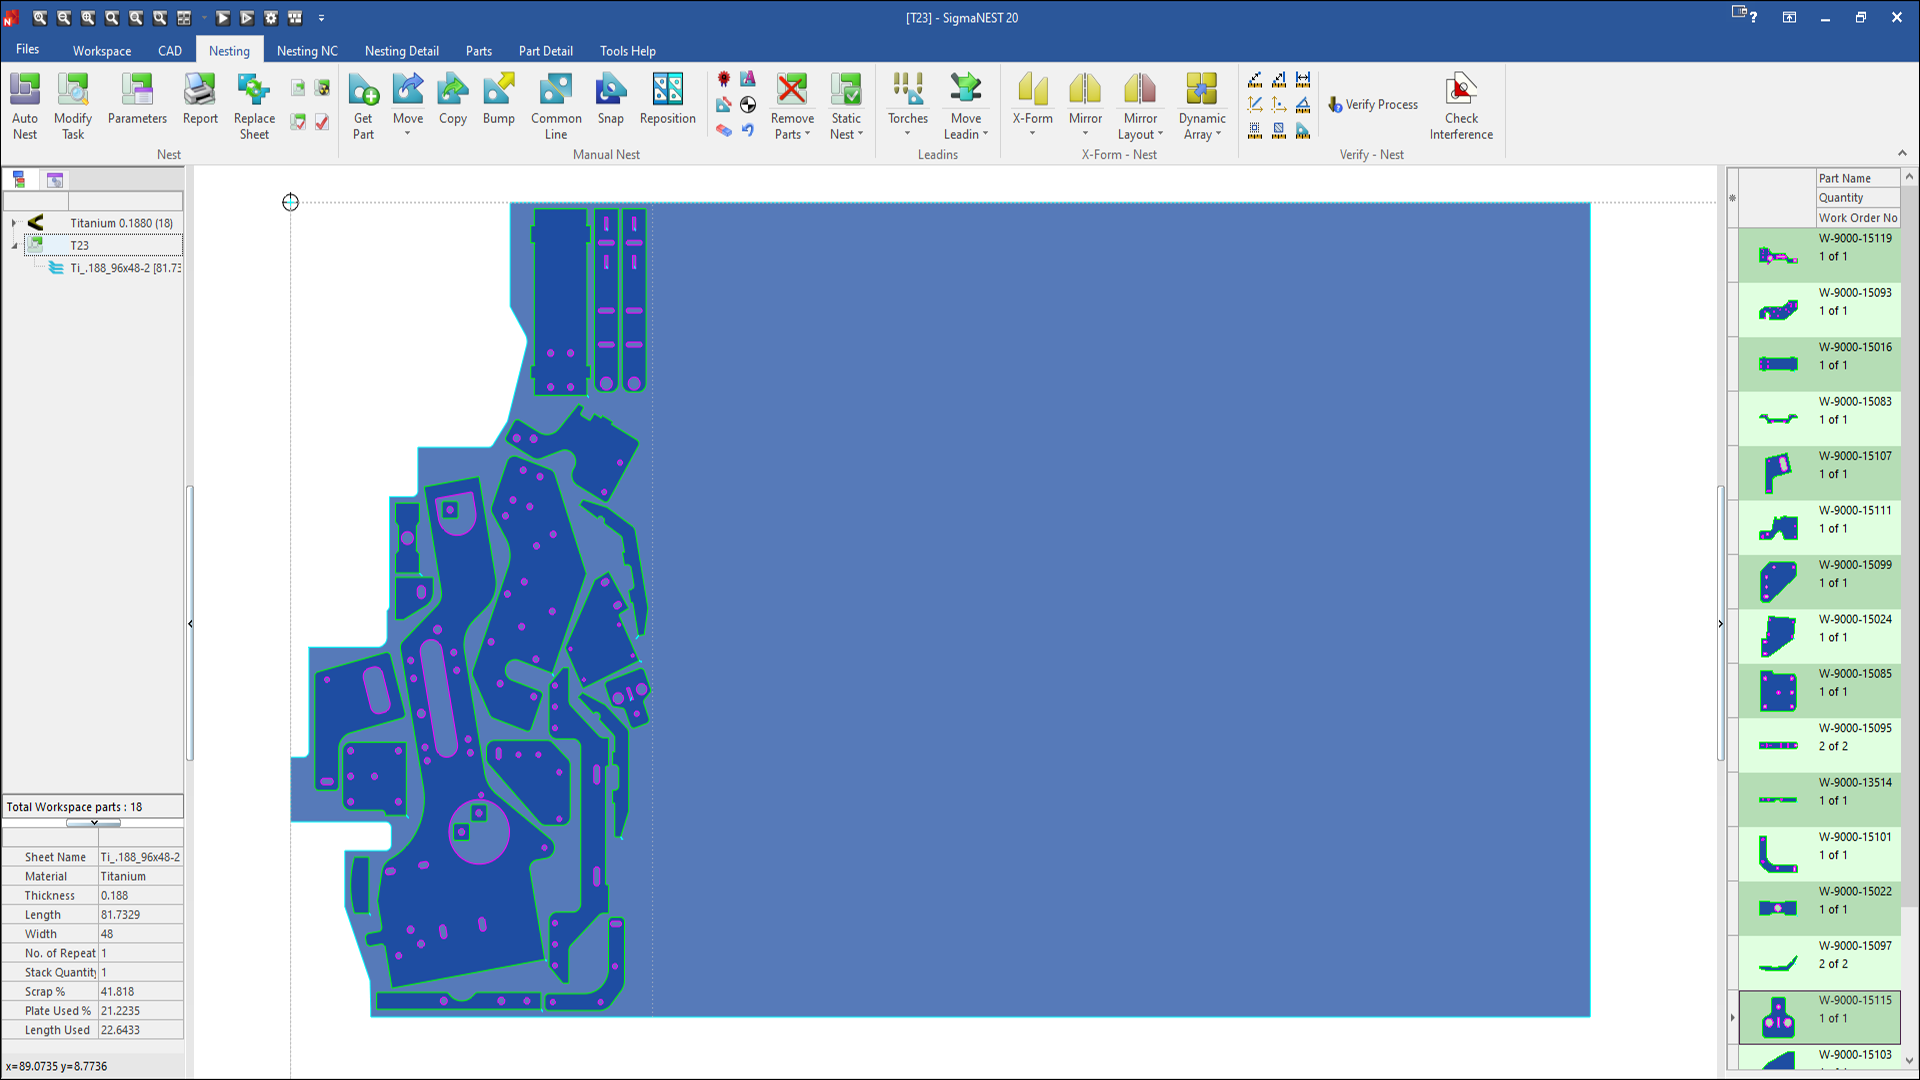 Version 20.2 integration of SigmaMRP and SigmaNEST allows visual inspection of parts on the quote. Part documents can be attached for reference in Shop Floor applications.